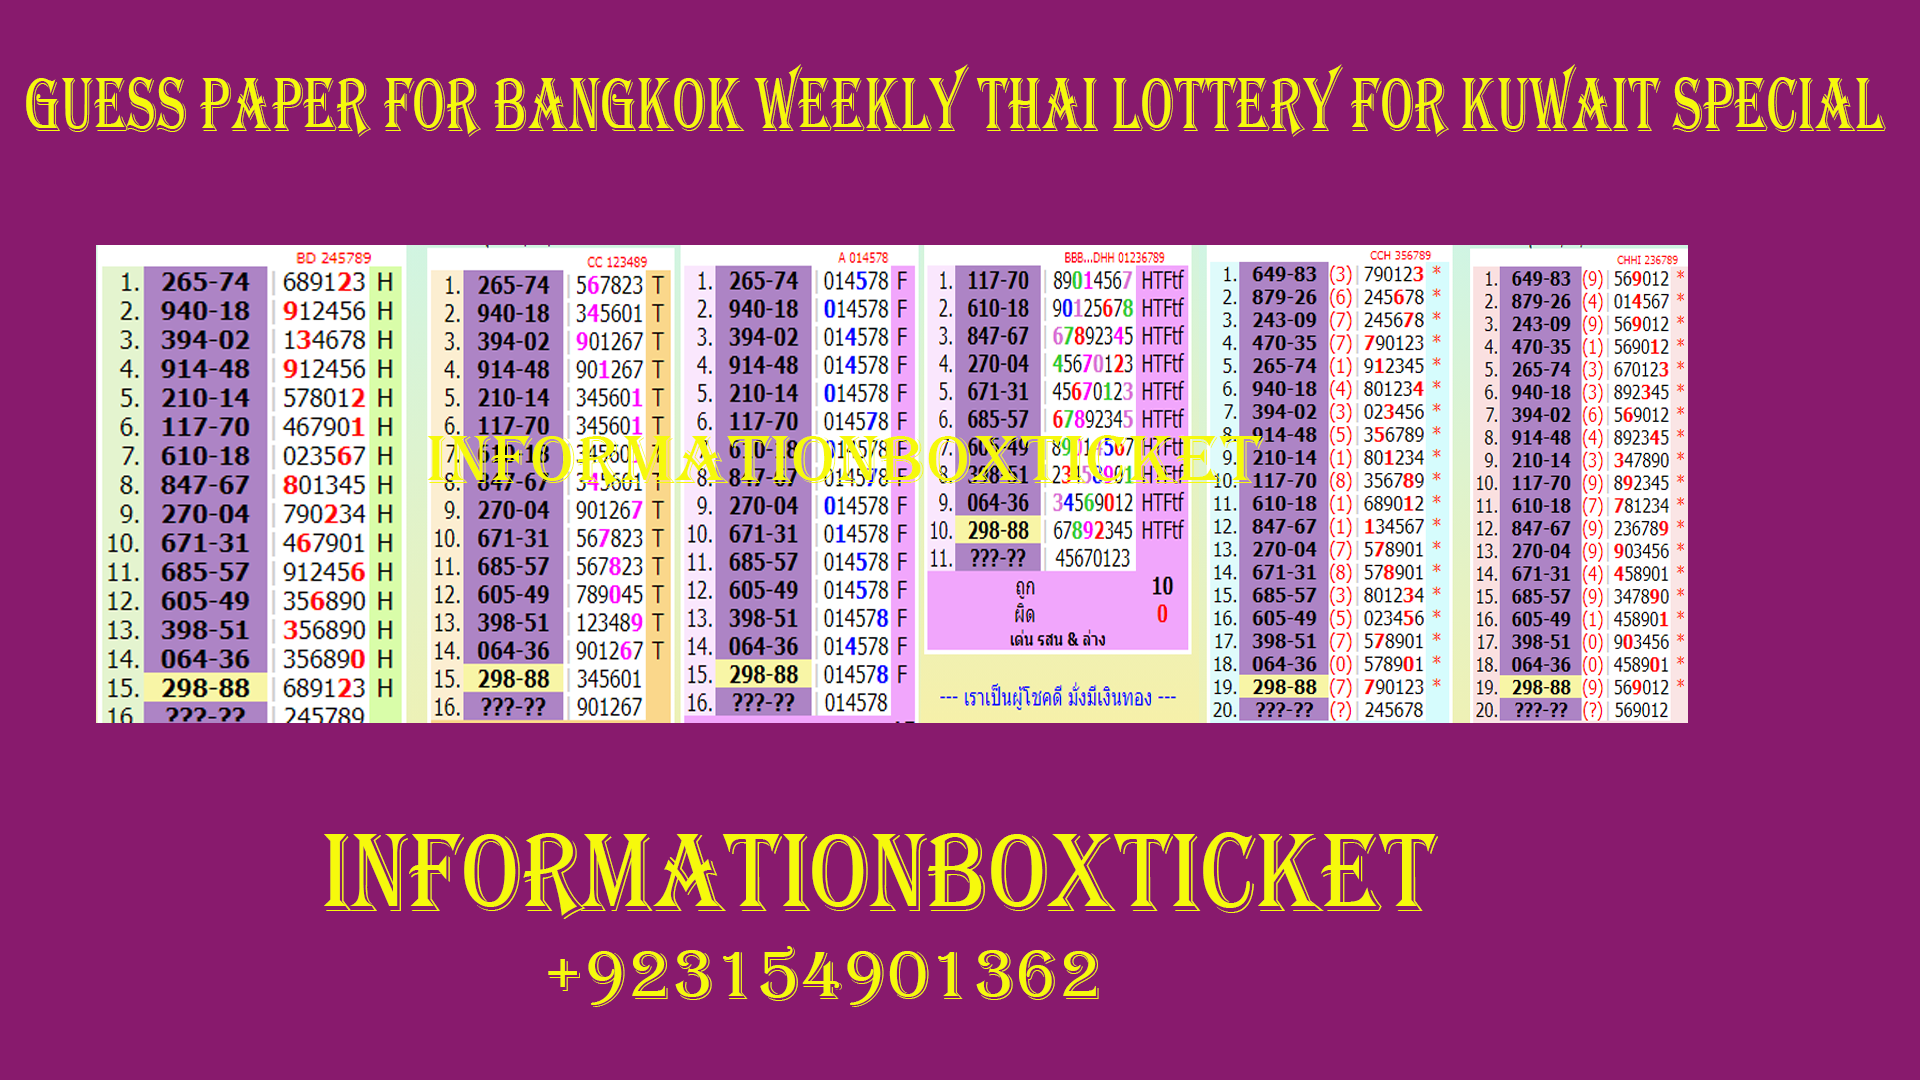 Guess paper for Bangkok weekly thai lottery for kuwait special